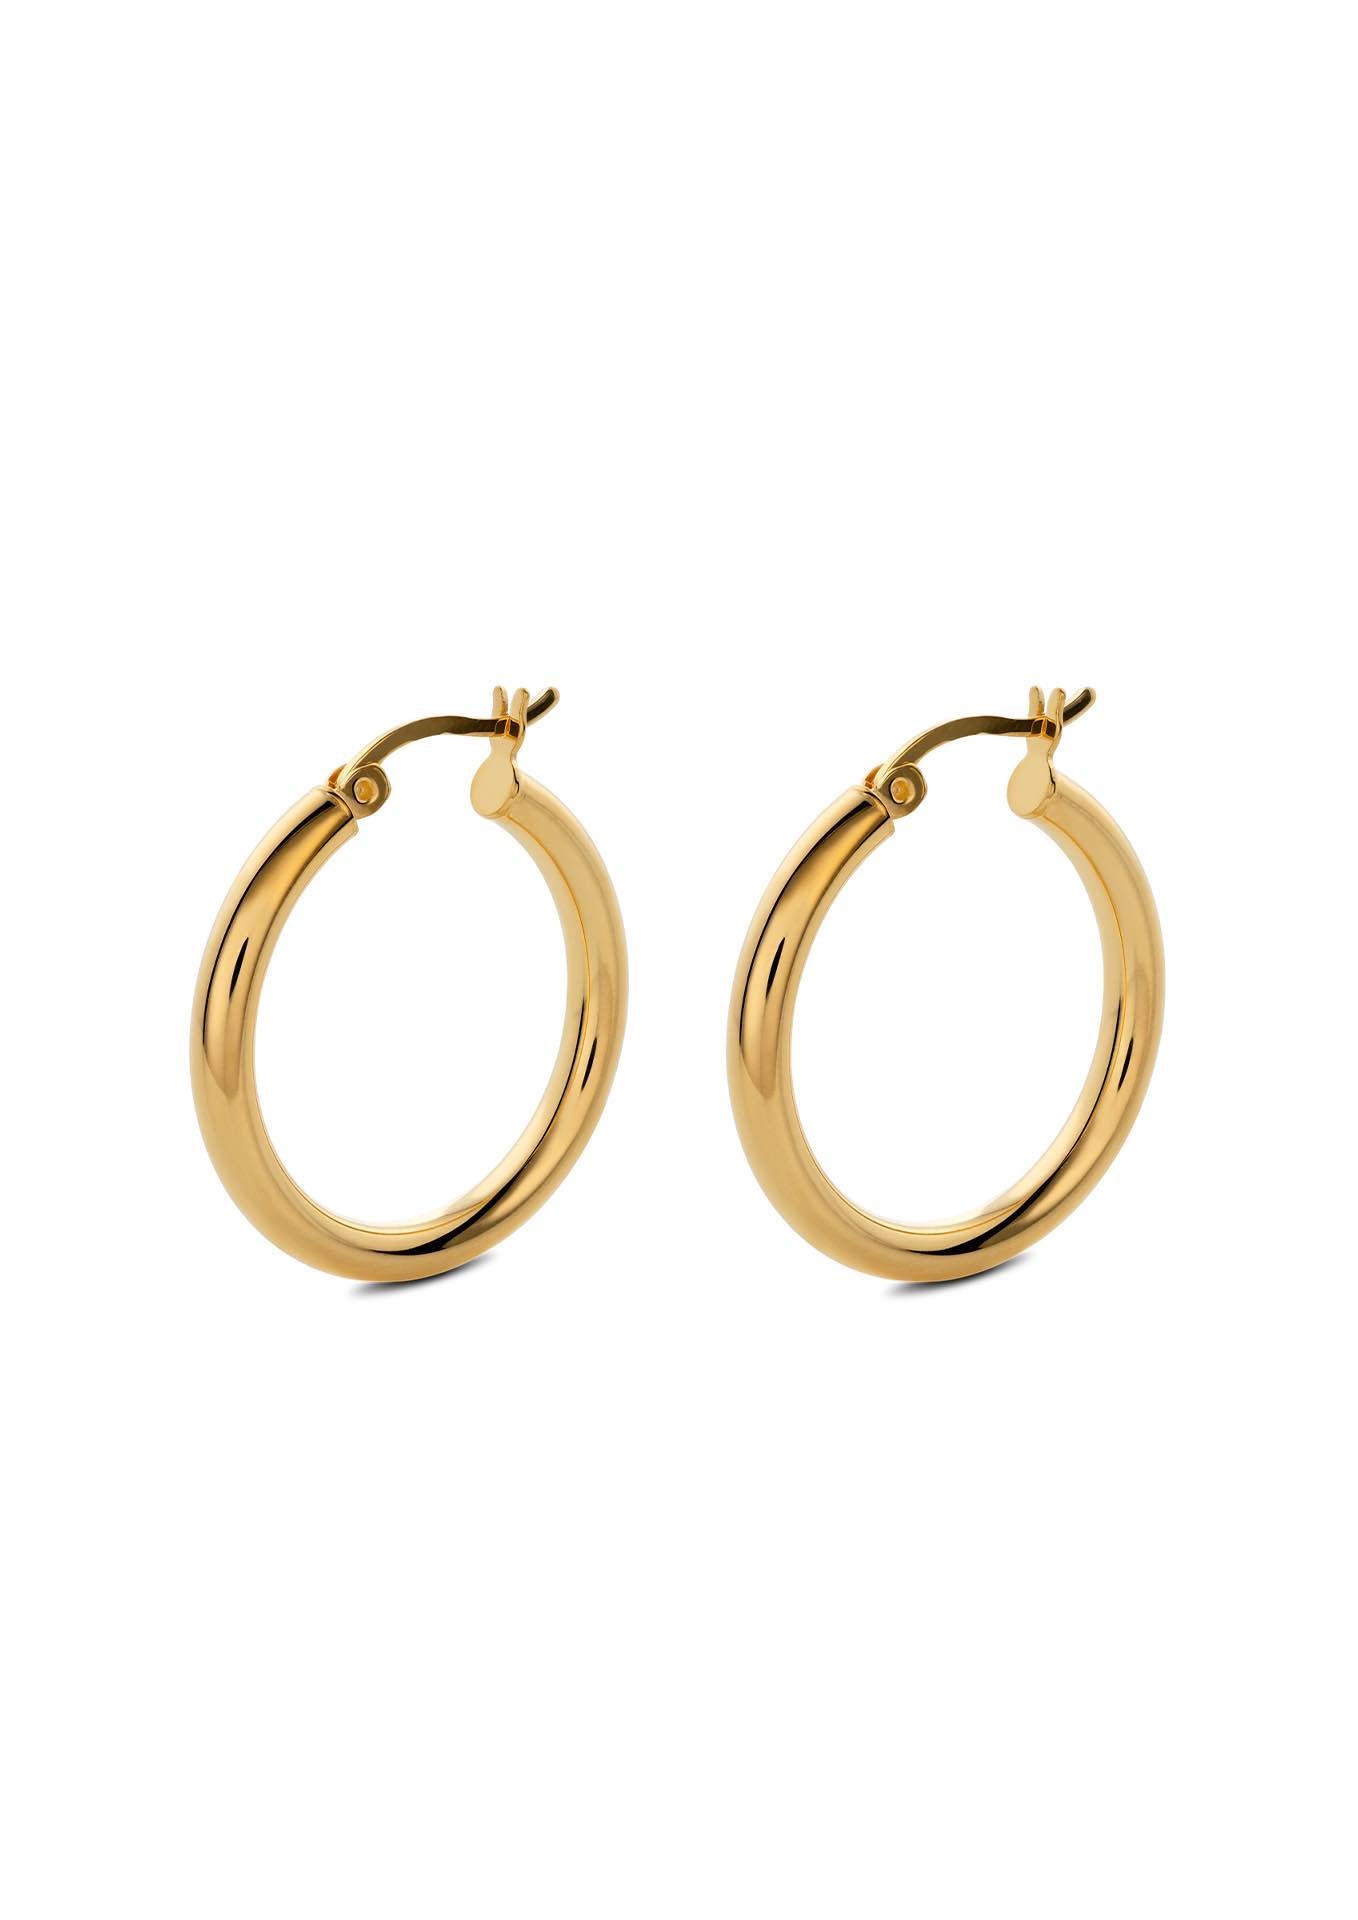 NO MORE accessories Django Hoops Gold in sterling silver.